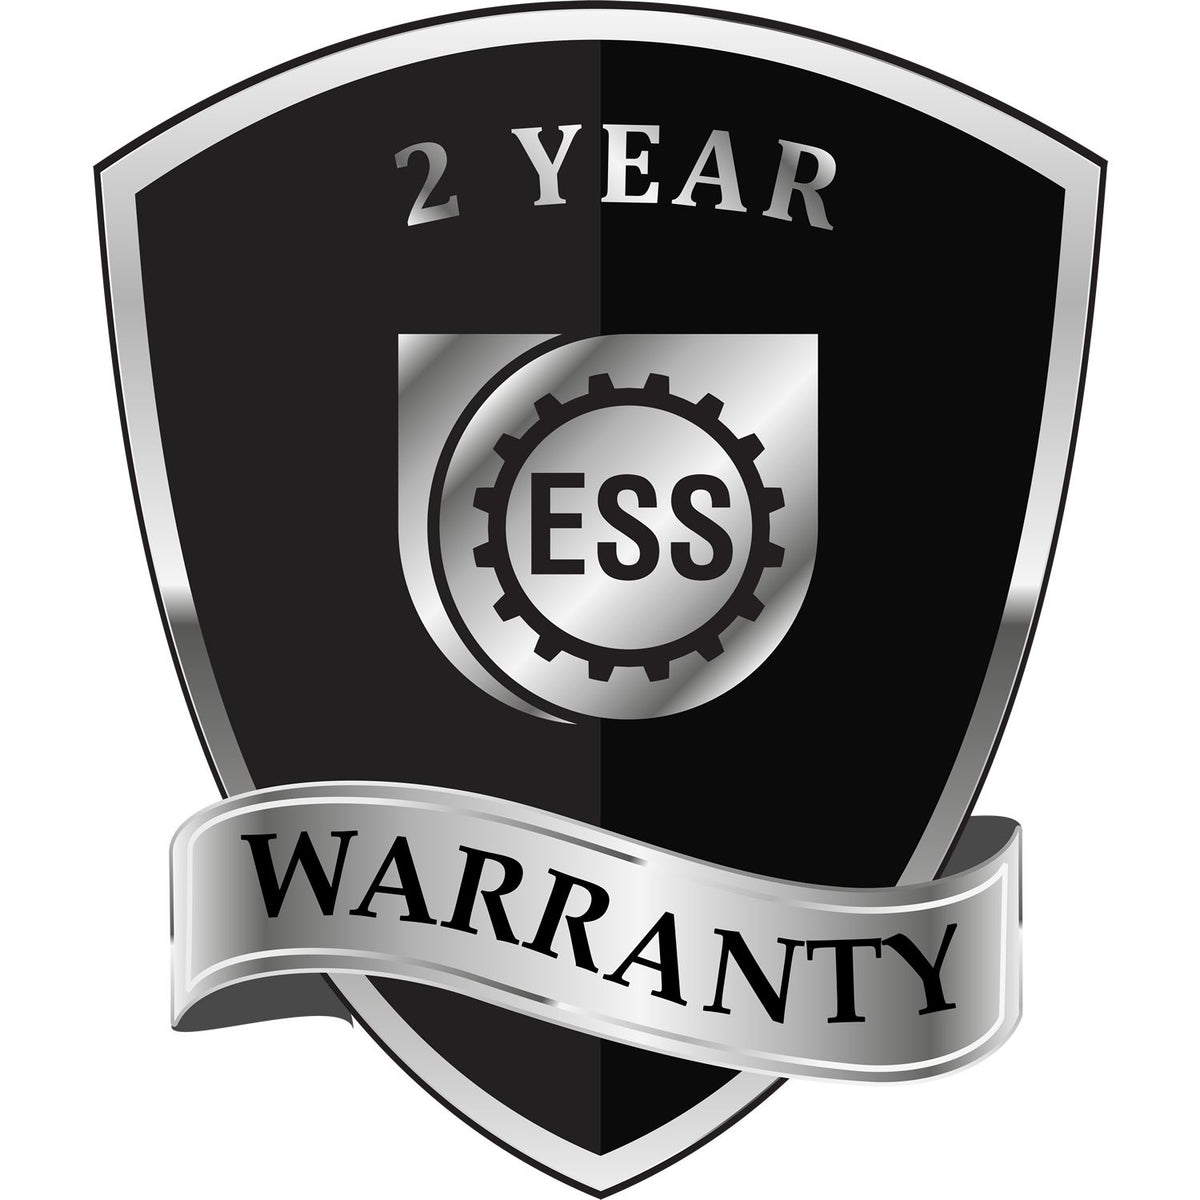 A black and silver badge or emblem showing warranty information for the Hybrid Texas Engineer Seal